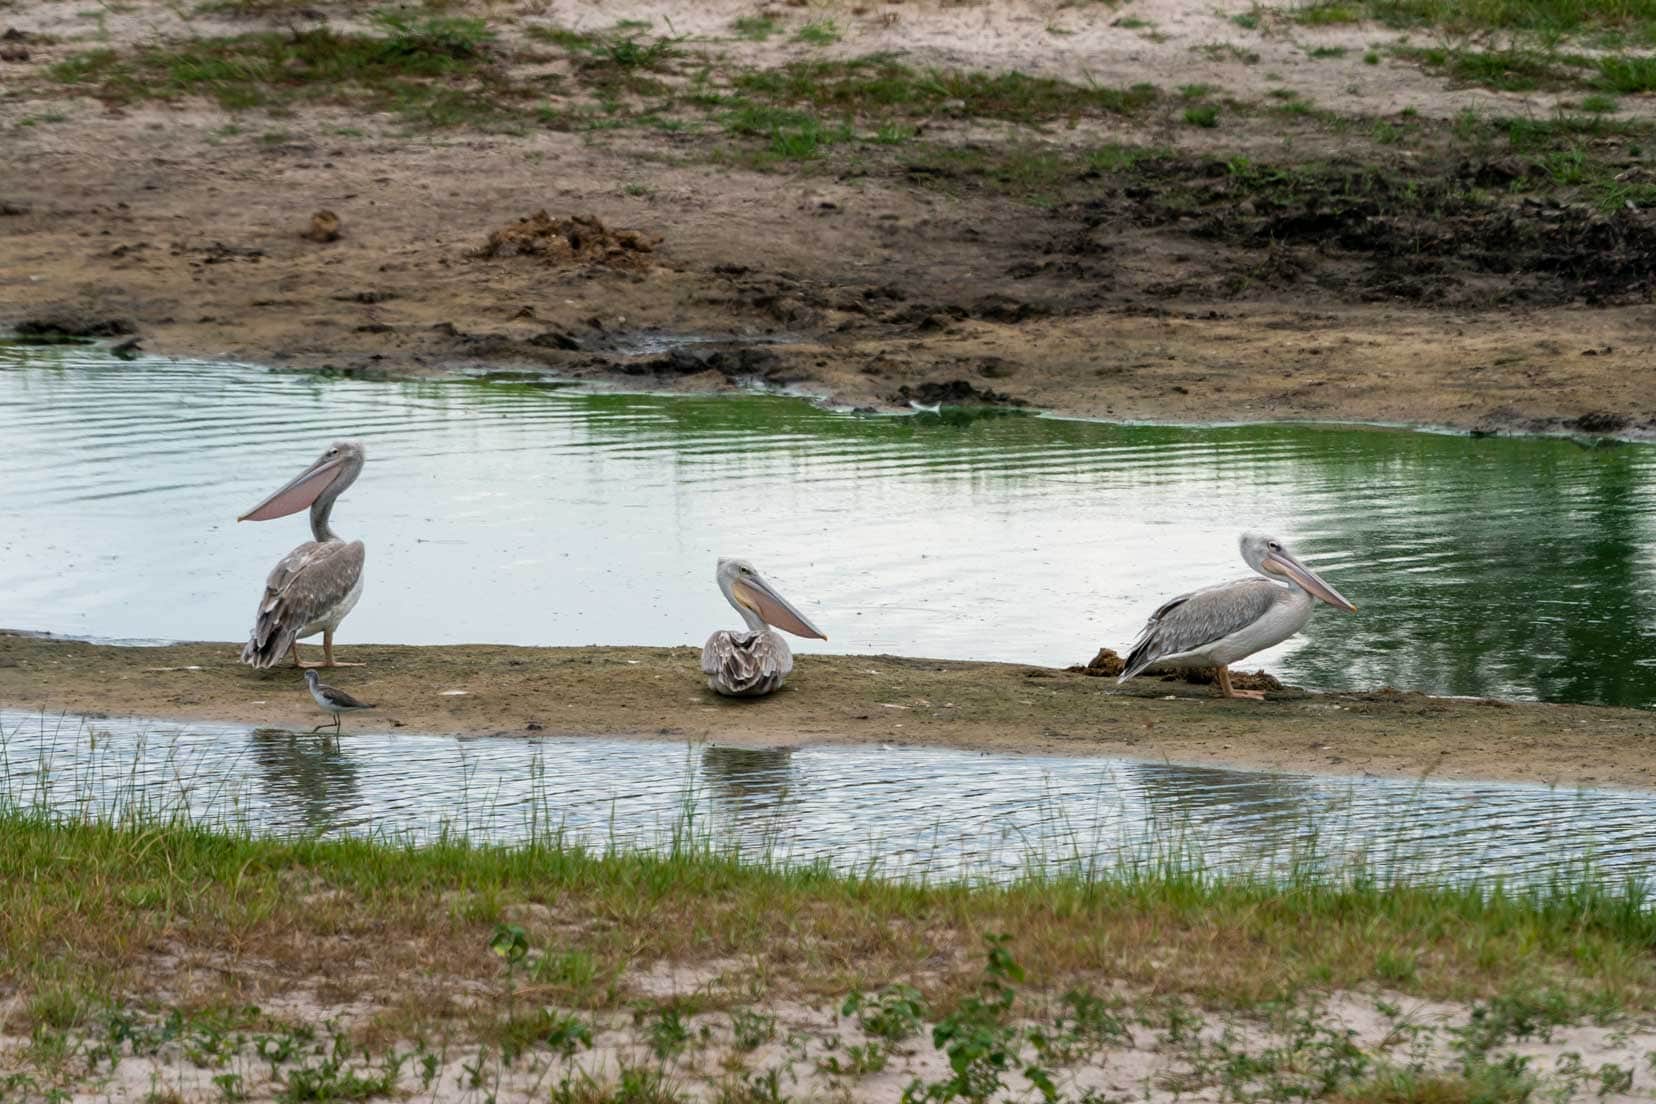 Pelicans in the pools of the Boteti River